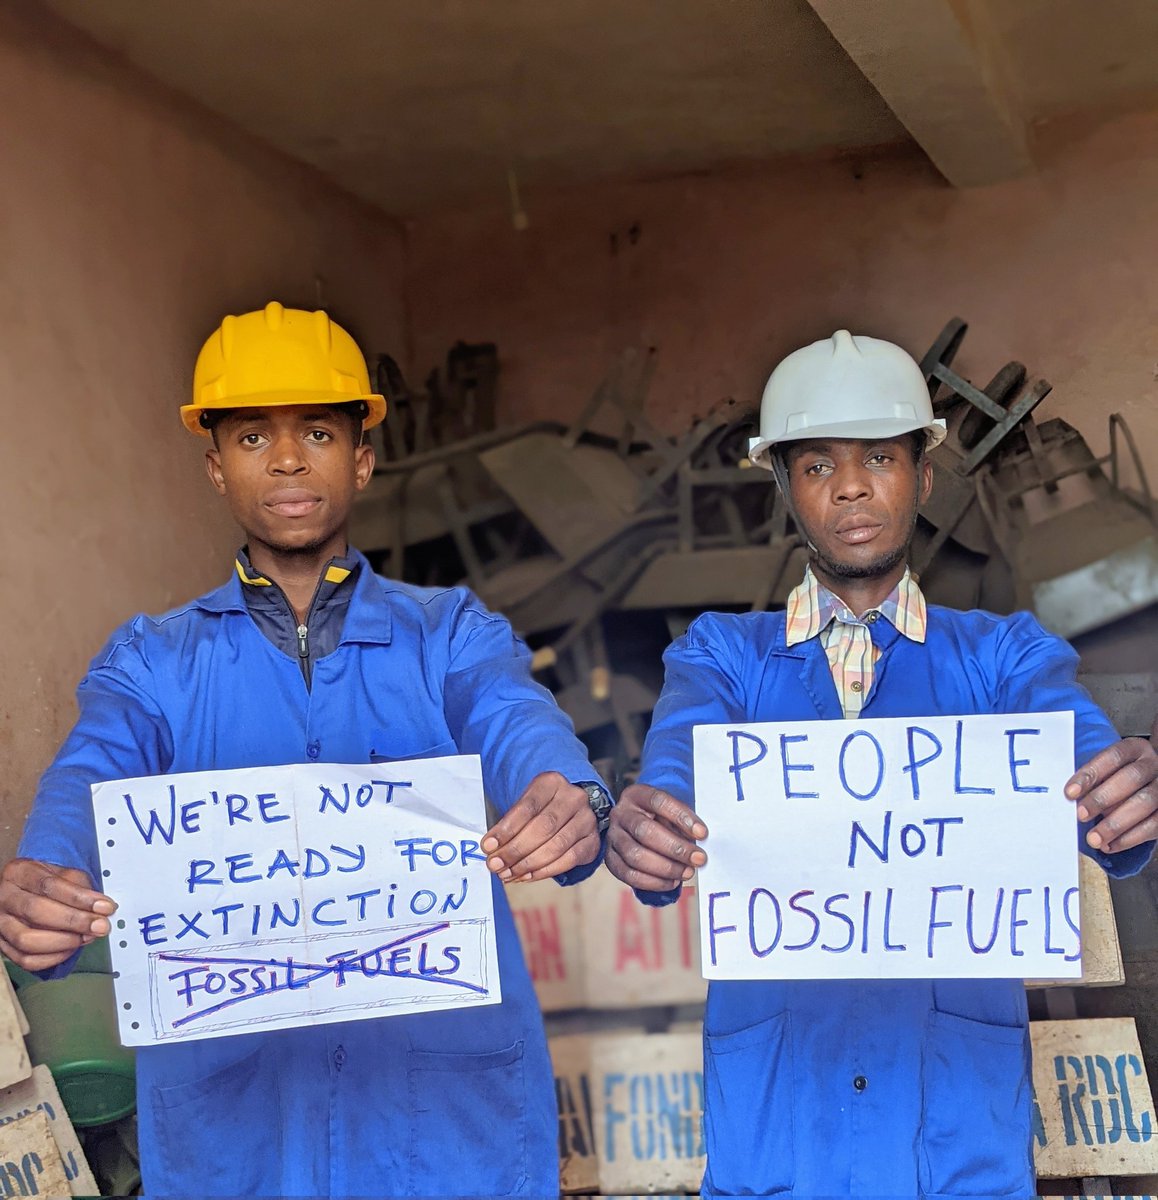 As the world seeks stability, fossil fuel companies continue to expand to improve their production in order to engulf humanity in chaos. Recent climatic disasters in China, Qatar, the USA, Chile and throughout Africa can serve as an example and call on us to act urgently. #ActNow